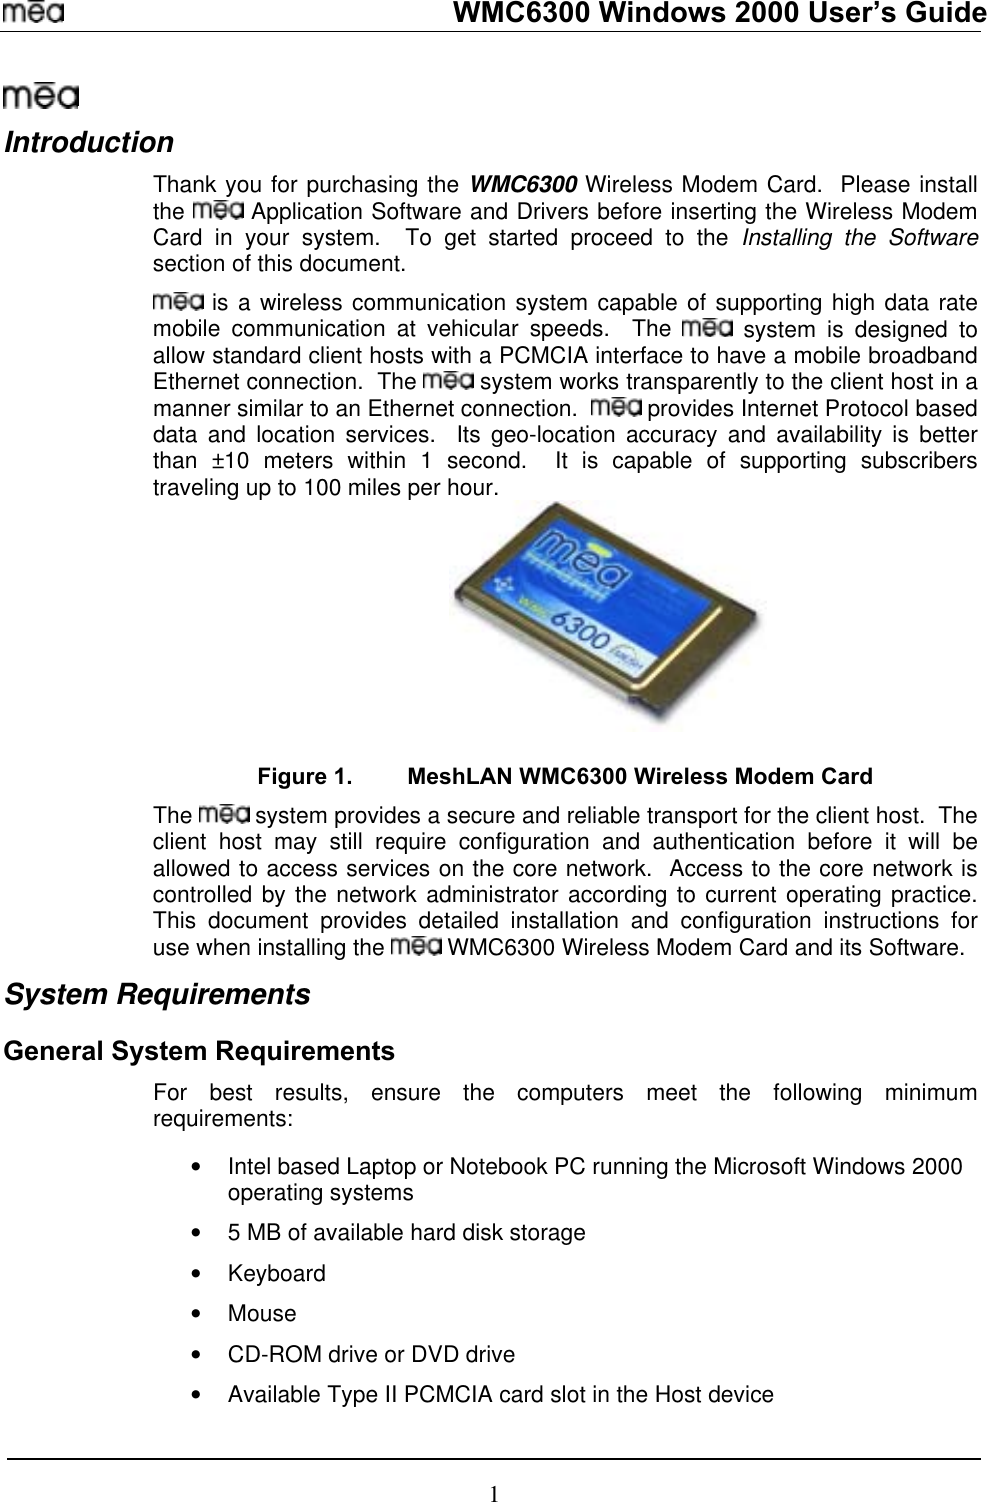   WMC6300 Windows 2000 User’s Guide  Introduction Thank you for purchasing the WMC6300 Wireless Modem Card.  Please install the   Application Software and Drivers before inserting the Wireless Modem Card in your system.  To get started proceed to the Installing the Software section of this document.  is a wireless communication system capable of supporting high data rate mobile communication at vehicular speeds.  The   system is designed to allow standard client hosts with a PCMCIA interface to have a mobile broadband Ethernet connection.  The   system works transparently to the client host in a manner similar to an Ethernet connection.    provides Internet Protocol based data and location services.  Its geo-location accuracy and availability is better than ±10 meters within 1 second.  It is capable of supporting subscribers traveling up to 100 miles per hour.  Figure 1.  MeshLAN WMC6300 Wireless Modem Card The    hoclient st may still require configuration and authentication before it will be allowed to access services on the core network.  Access to the core network is controlled by the network administrator according to current operating practice.  This document provides detailed installation and configuration instructions for use when installing the   WMC6300 Wireless Modem Card and its Software.  system pro s a secure and reliable transport for the client hvide ost.  The System Requirements General System Requirements ure the computers meet the following minimum  •  Intel based Laptop or Notebook PC running the Microsoft Windows 2000 •  rd disk storage  drive or DVD drive d slot in the Host device For best results, ensrequirements: operating systems 5 MB of available ha•  Keyboard •  Mouse •  CD-ROM•  Available Type II PCMCIA car1 